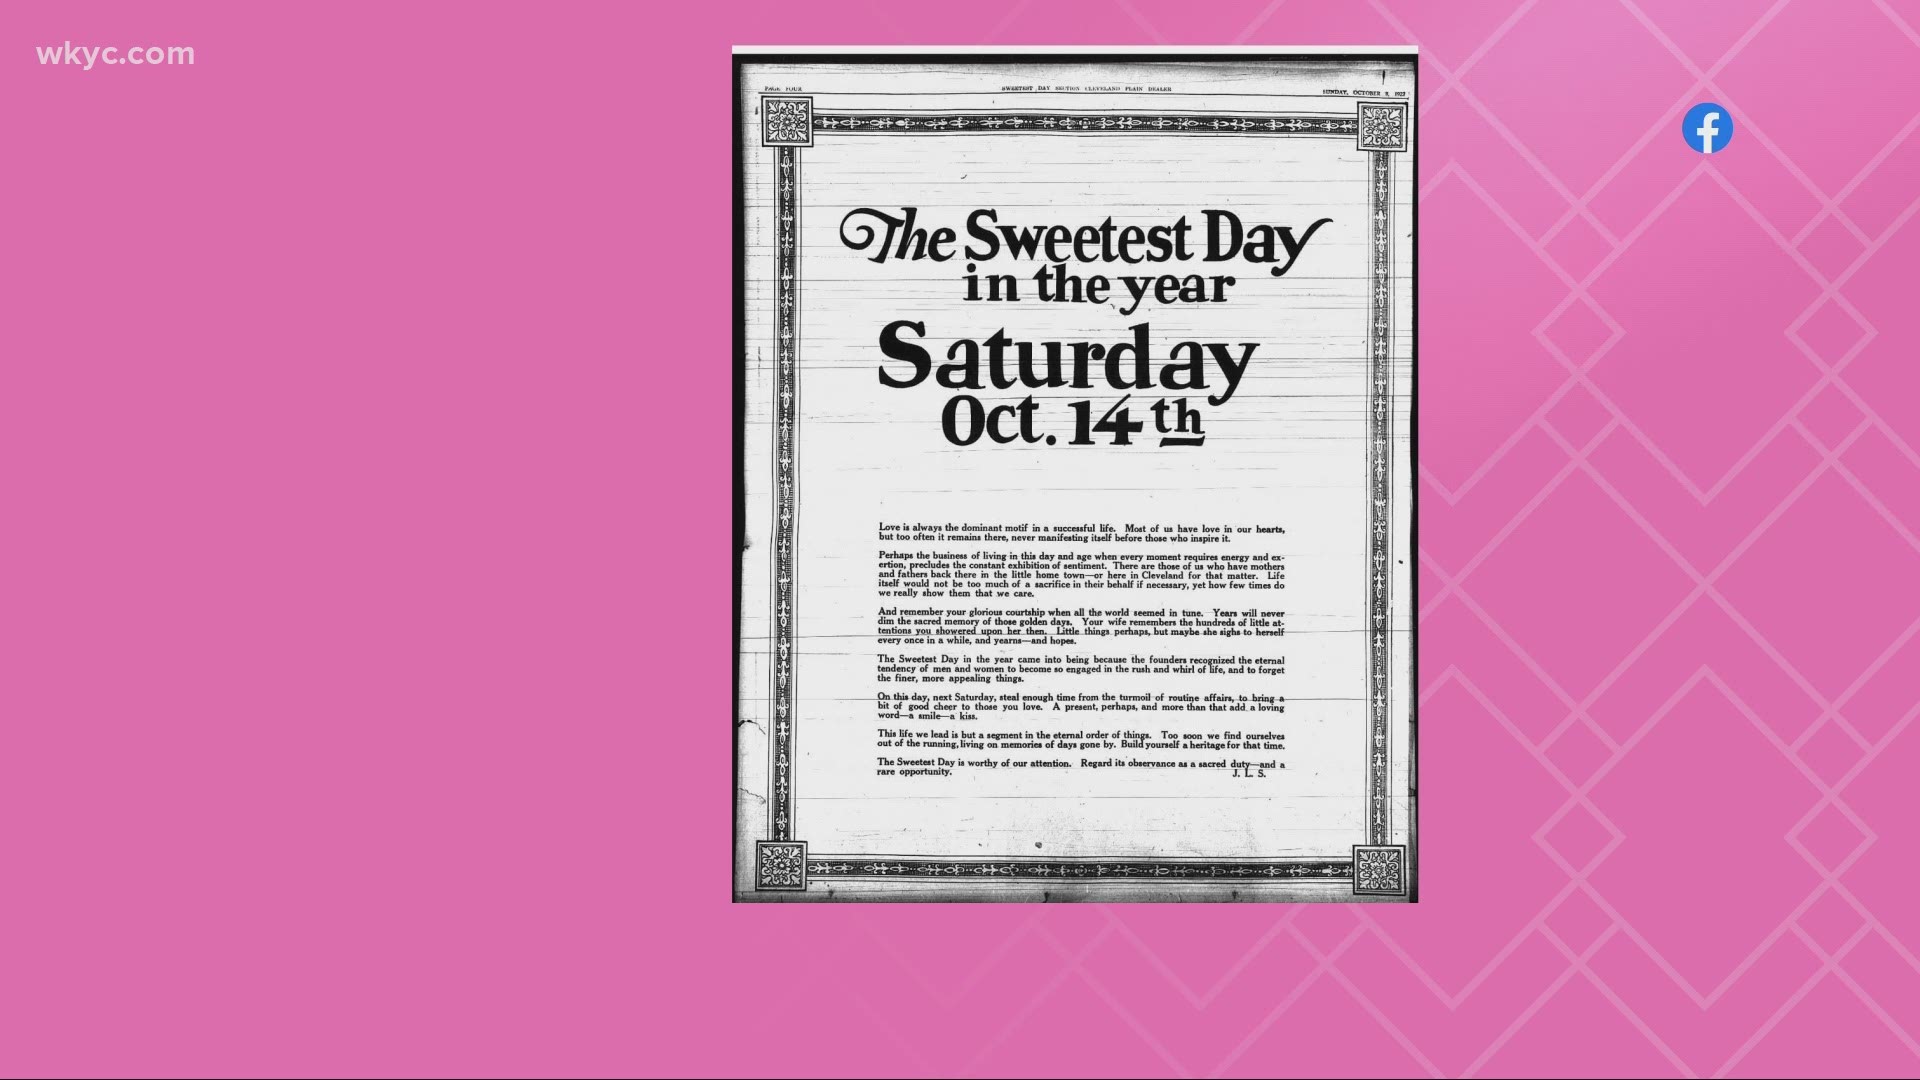 The history behind Sweetest Day show us your photos